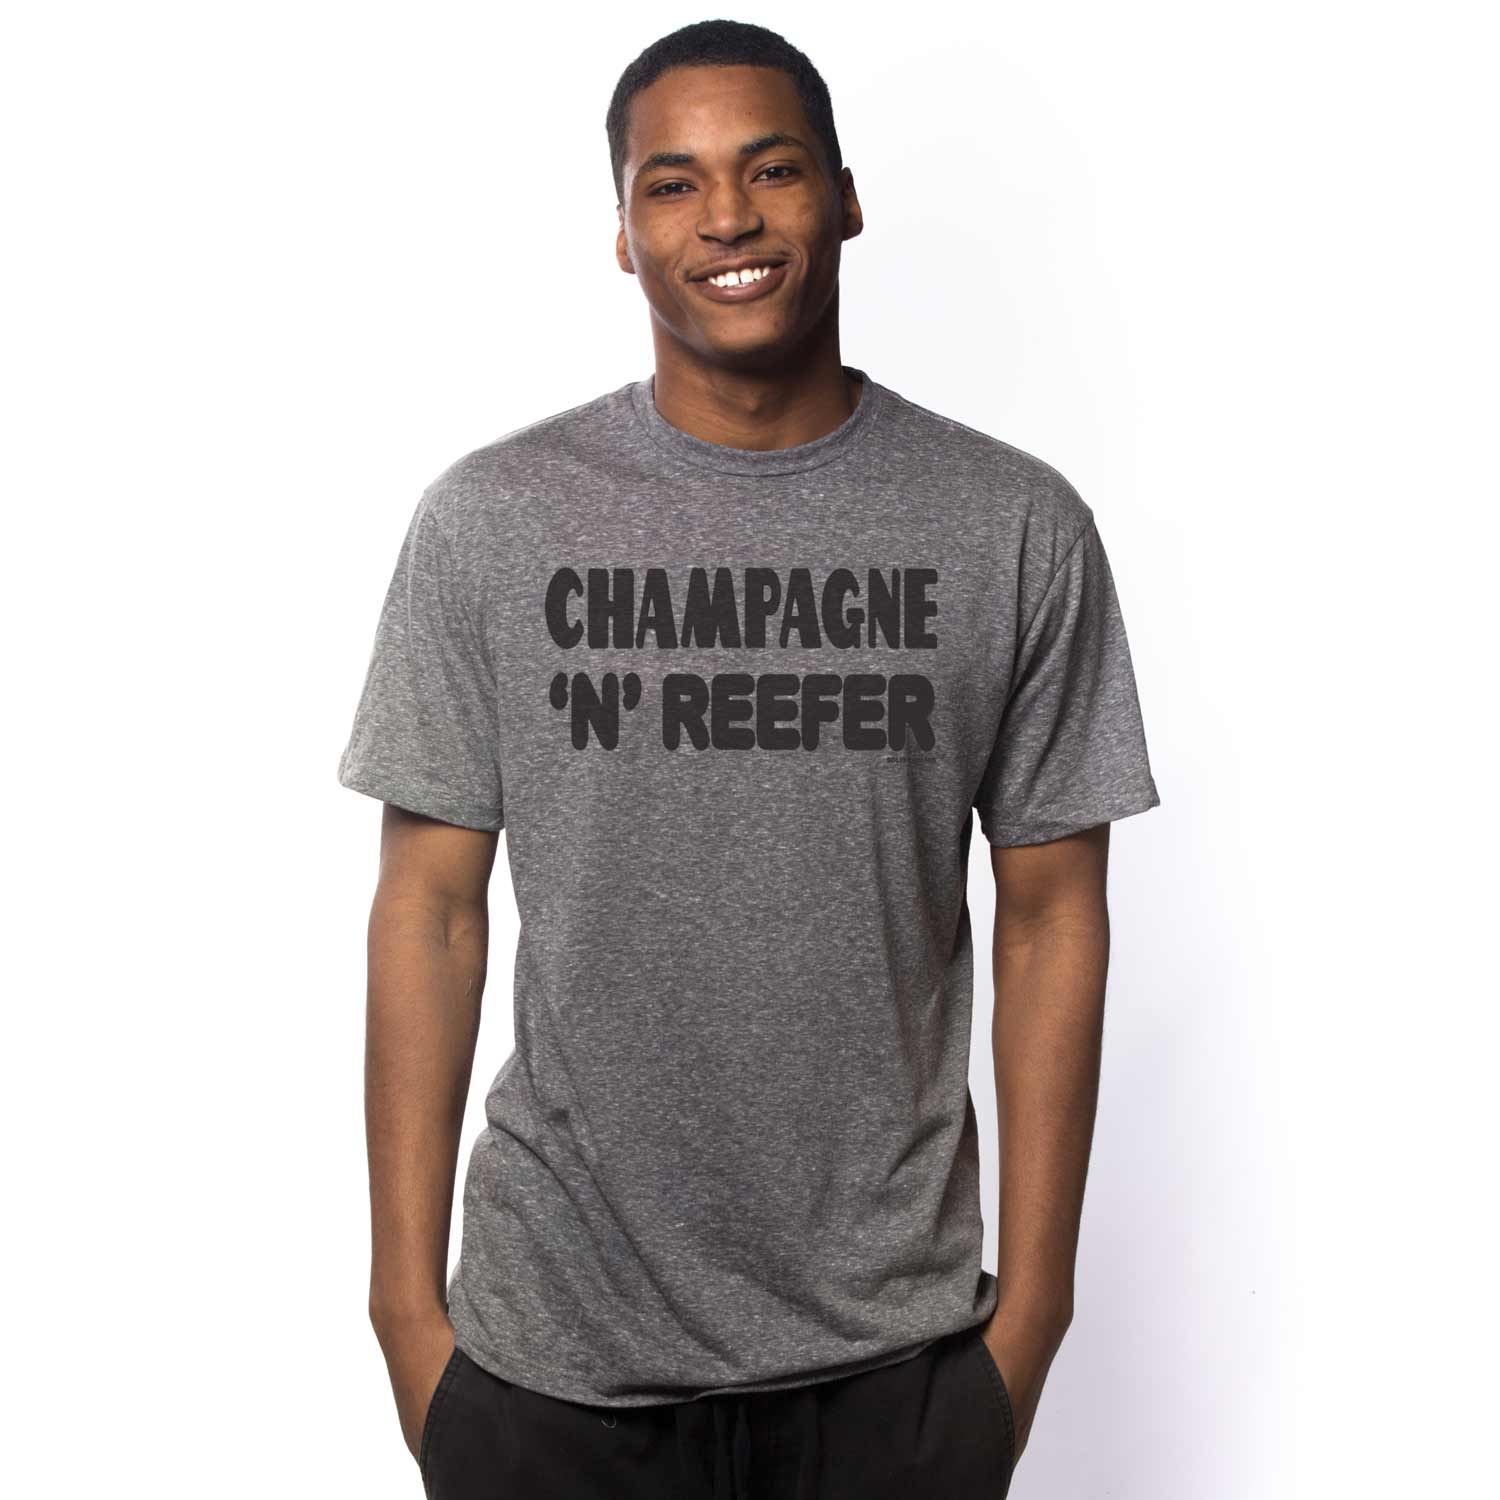 Men's Champagne & Reefer Cool Party Graphic T-Shirt | Vintage Celebration Tee | Solid Threads